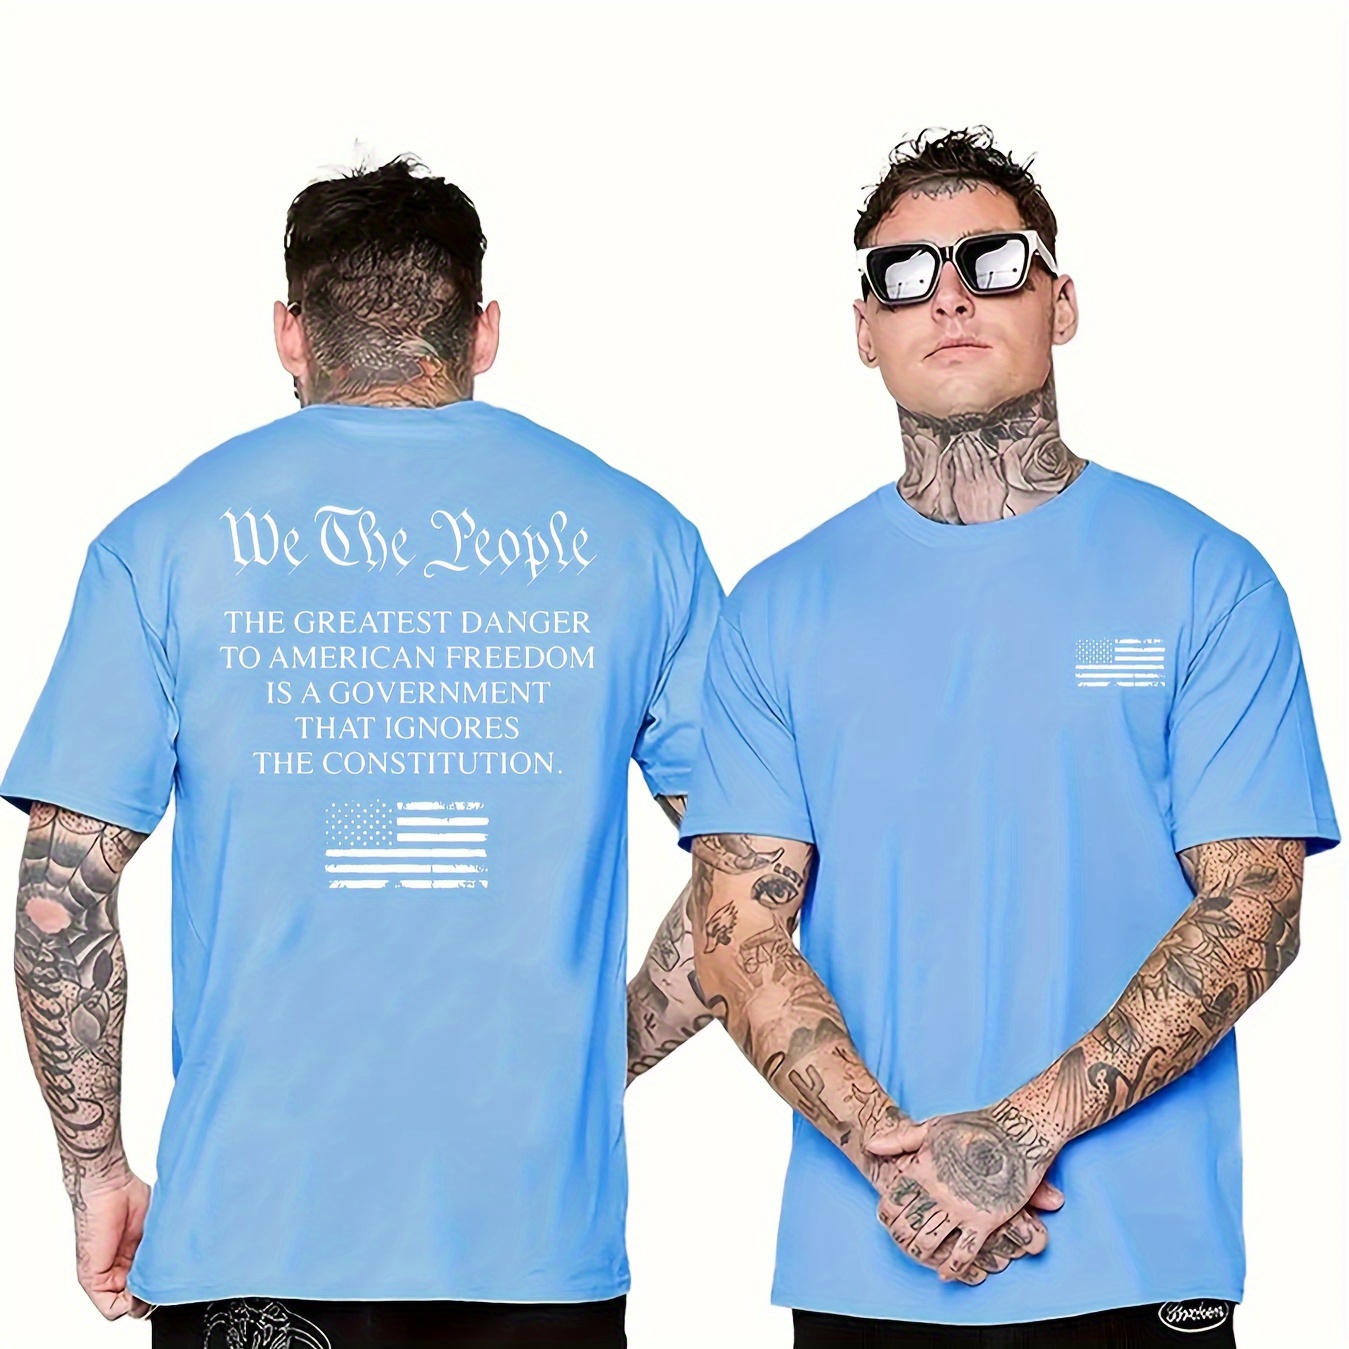 

Graffiti We The People And Usa Flag Graphic Print, Men's Comfy T-shirt, Casual Fit Tees For Summer, Men's Clothing Tops For Daily Activities